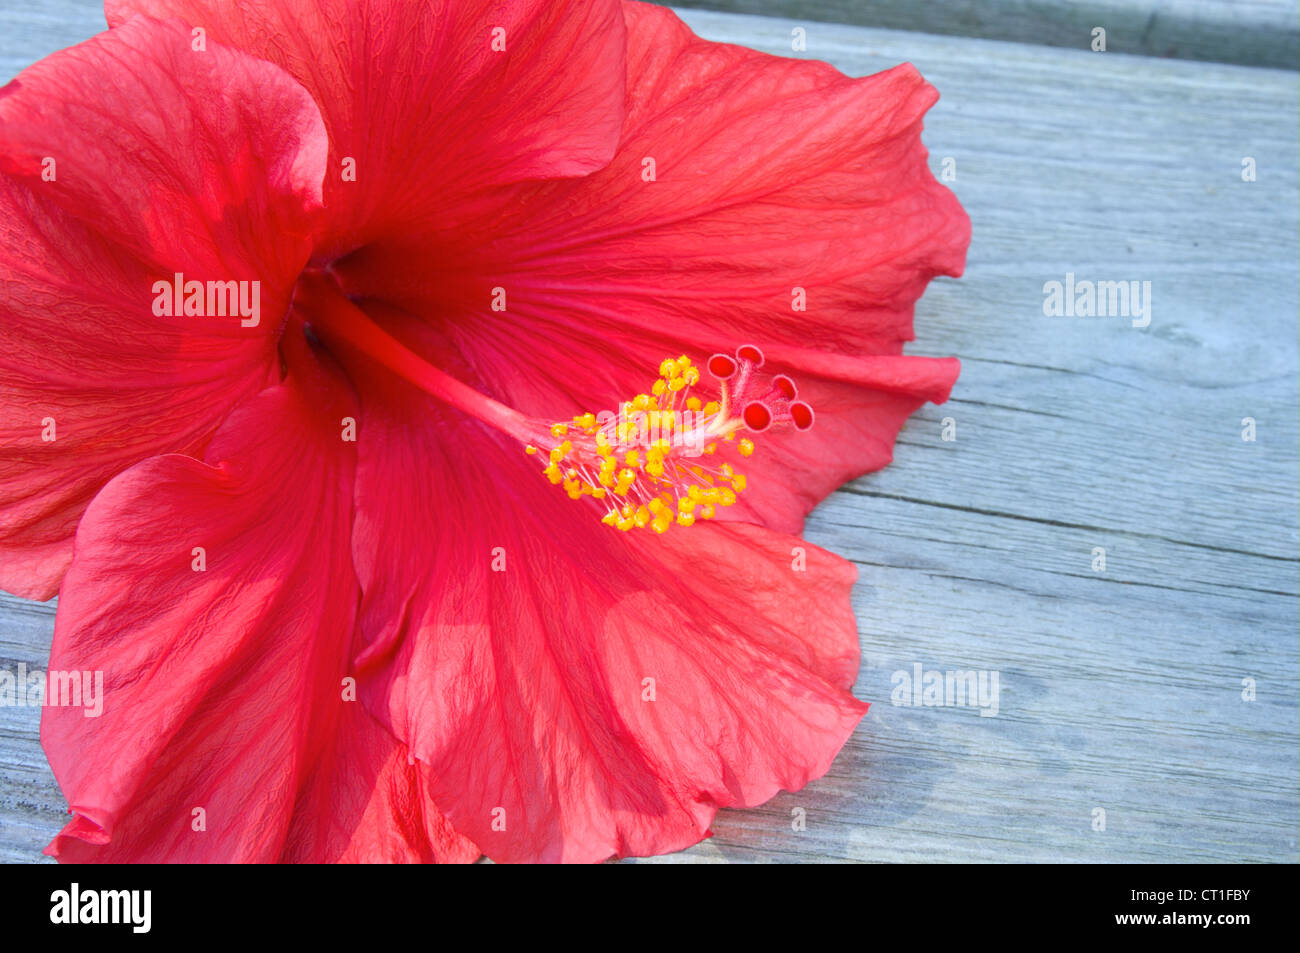 Closeup of red Hibiscus flower with vibrant red petals and stamen Stock Photo